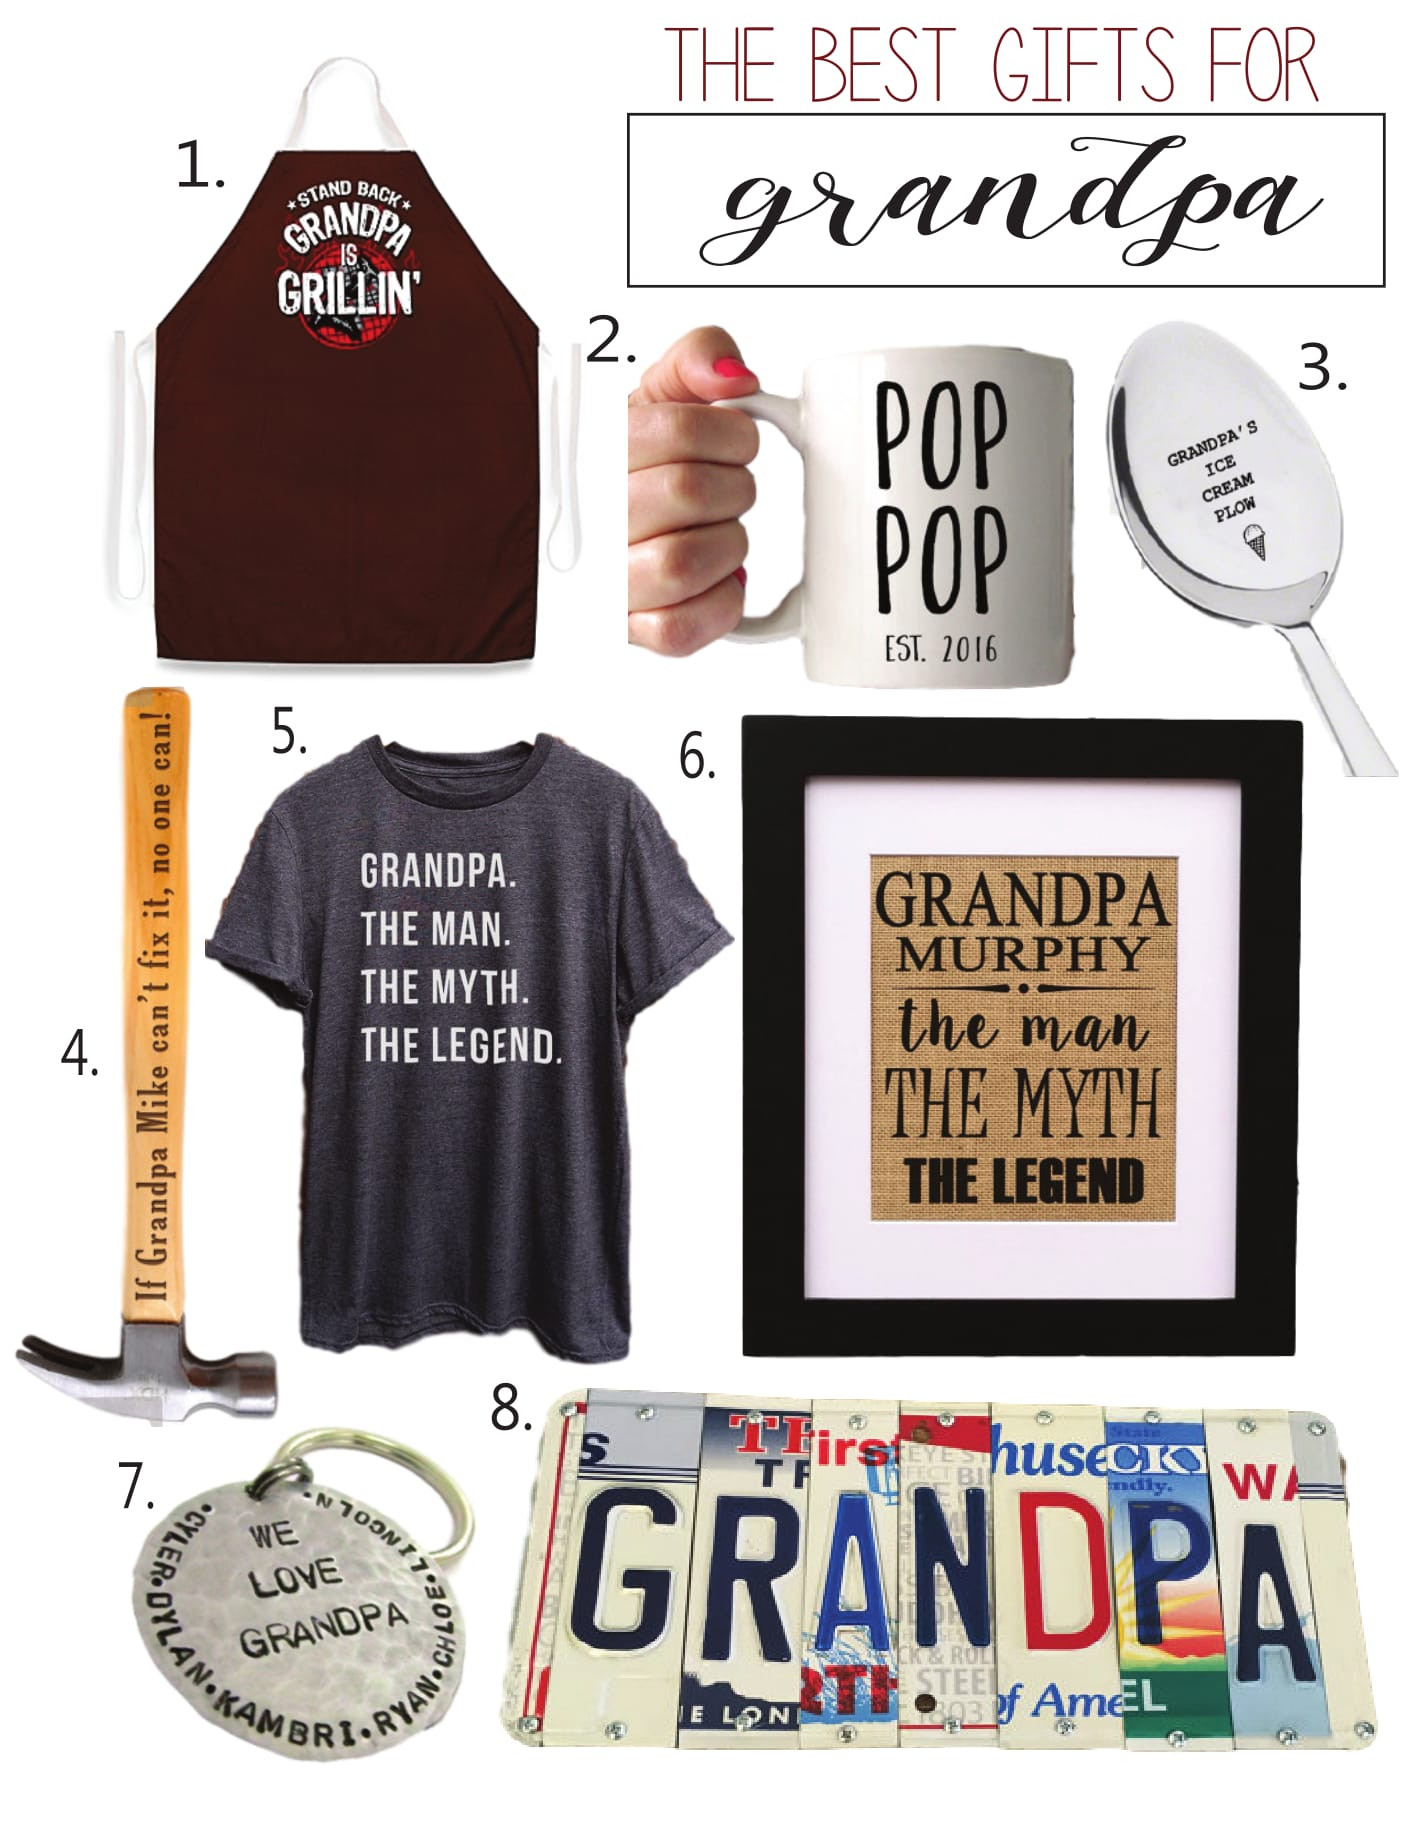 New Grandfather Gift Ideas
 The Best Gifts for Grandparents